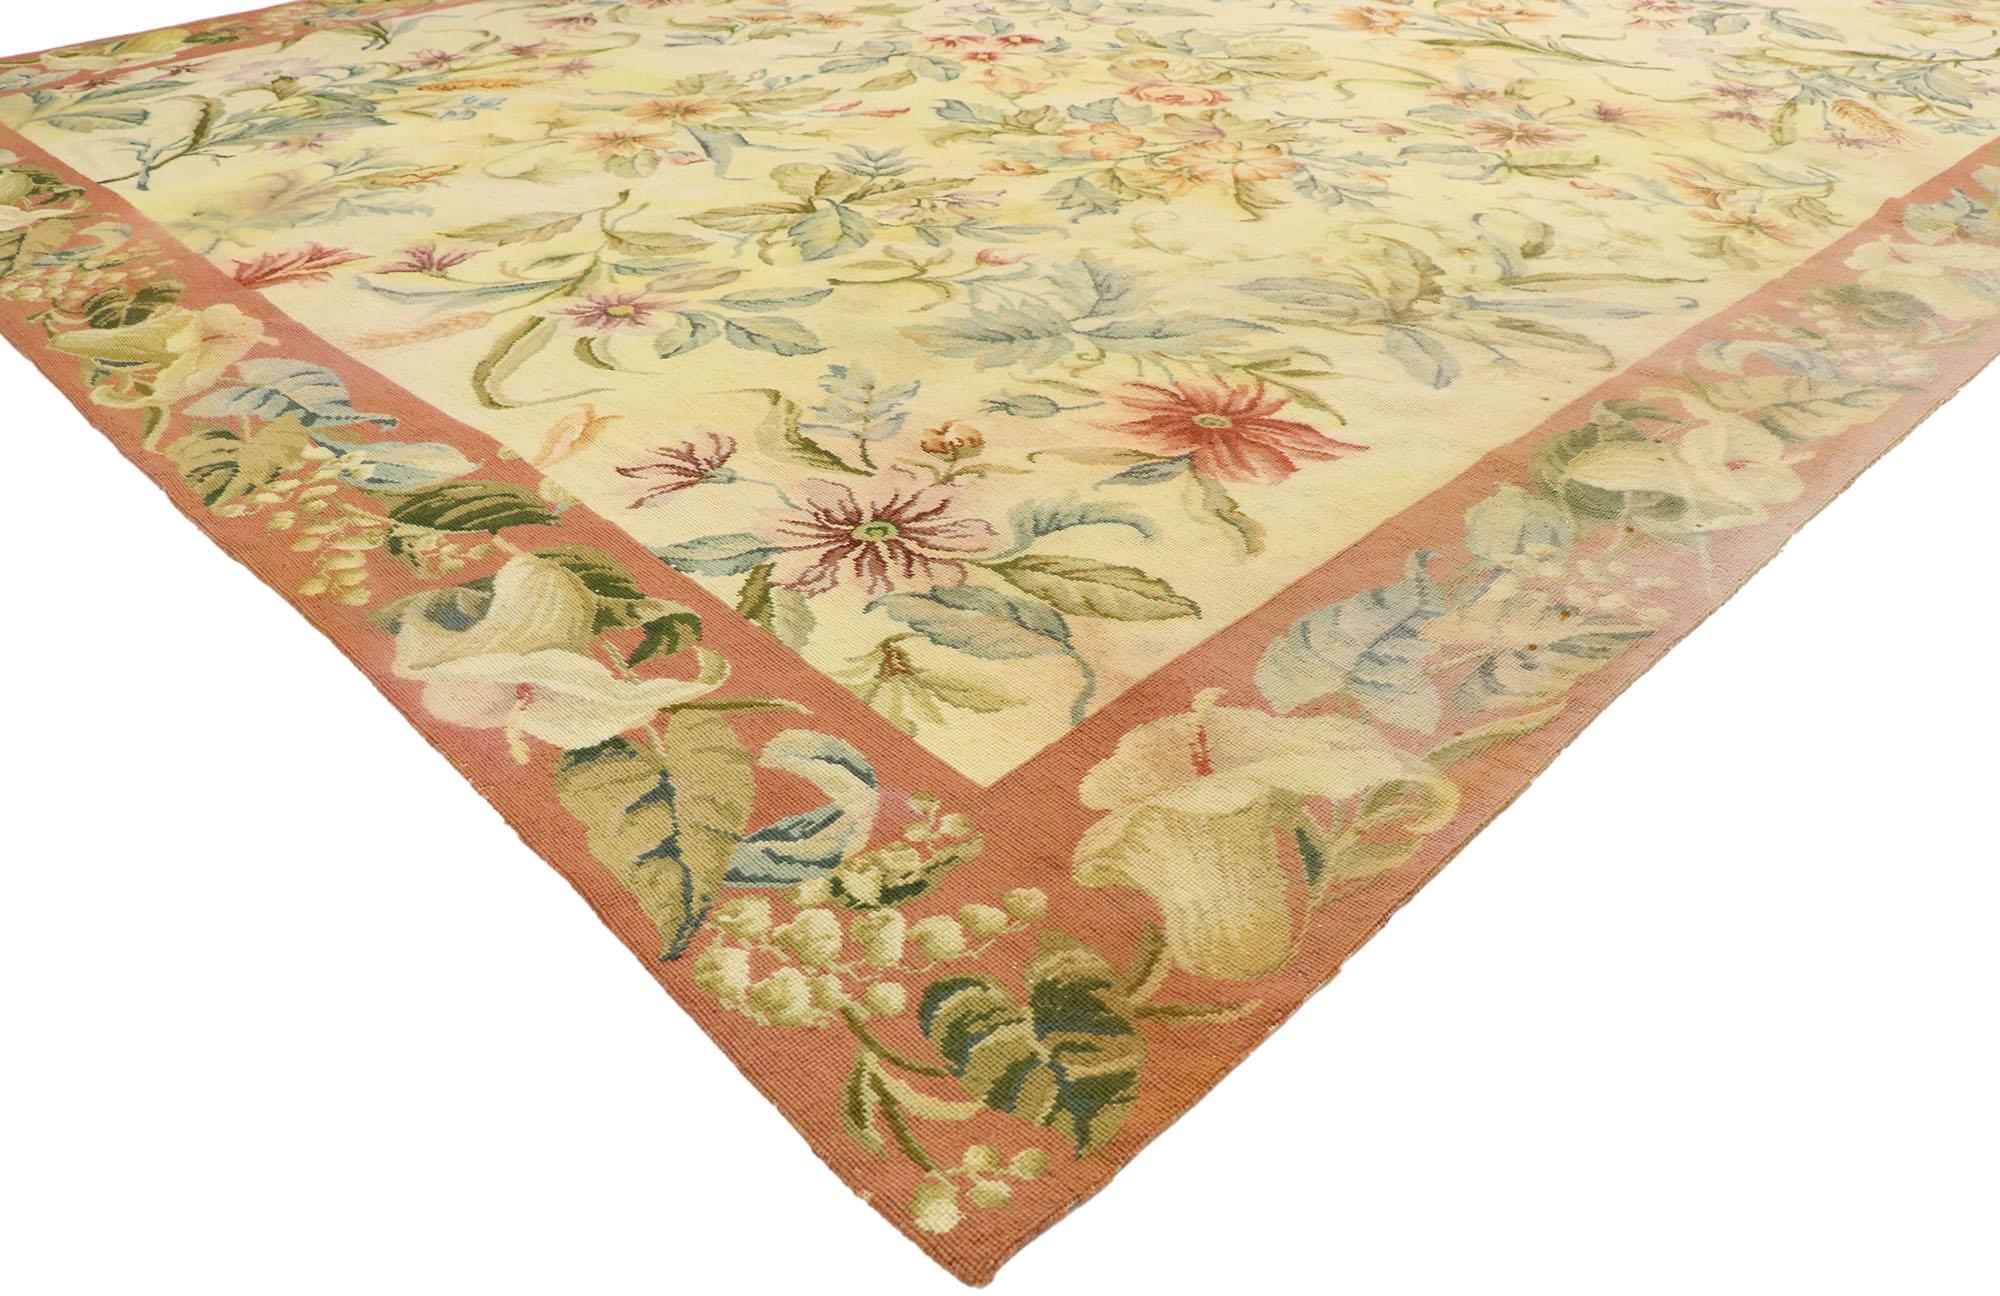 74924 vintage Chinese Floral Needlepoint rug with Garden Conservatory style. Blossoming with all kinds of beauty, this handwoven wool vintage Chinese needlepoint rug with Garden conservatory style is the epitome of nature's summertime abundance. A